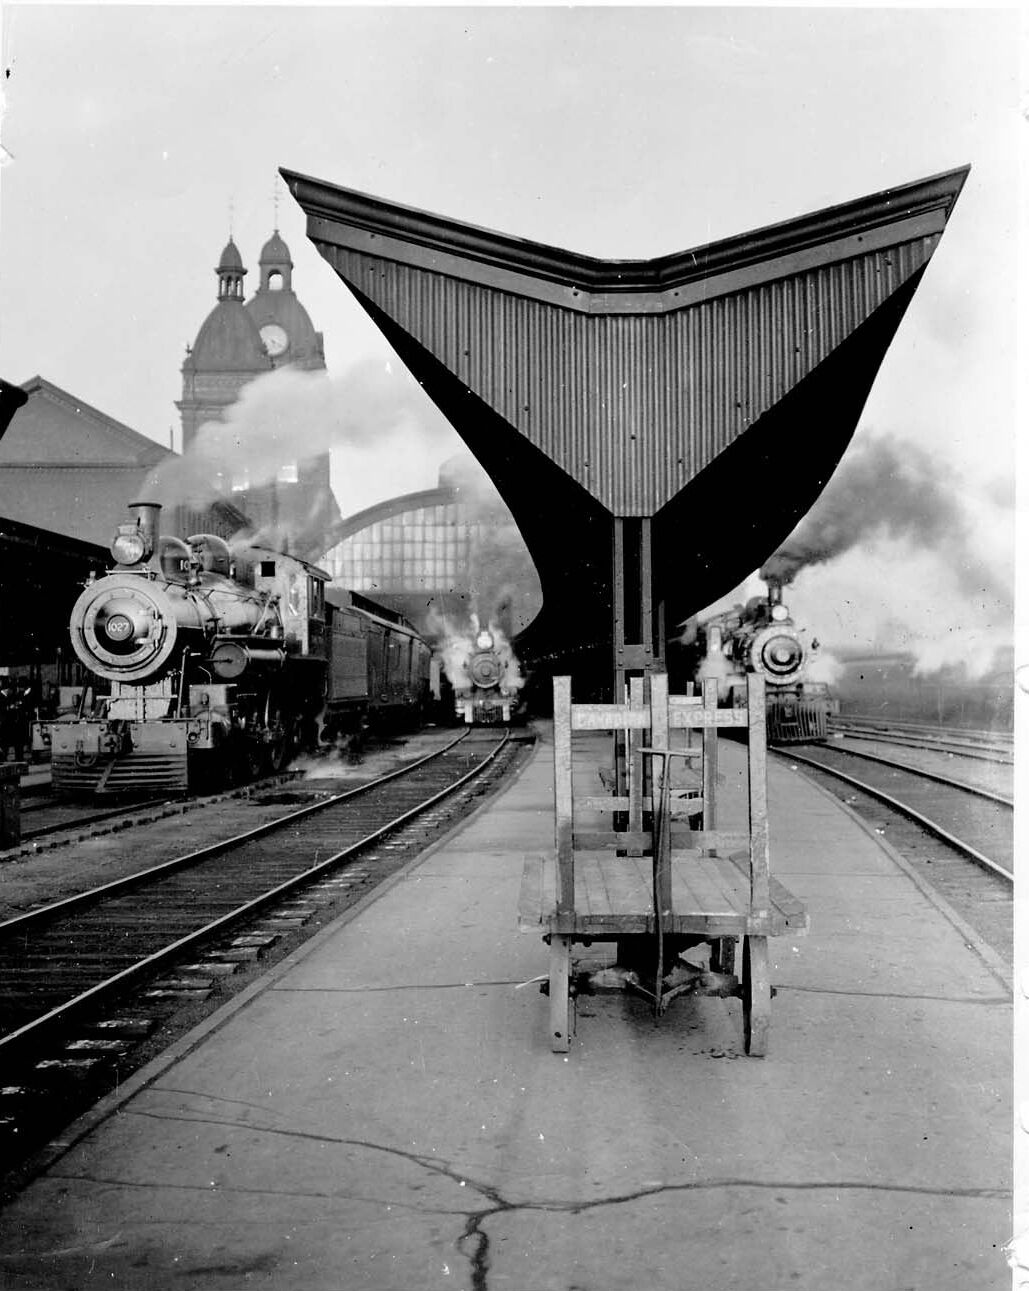 Three locomotives in the station at [Old Union Station](https://en.wikipedia.org/wiki/Toronto_Union_Station_(1873))